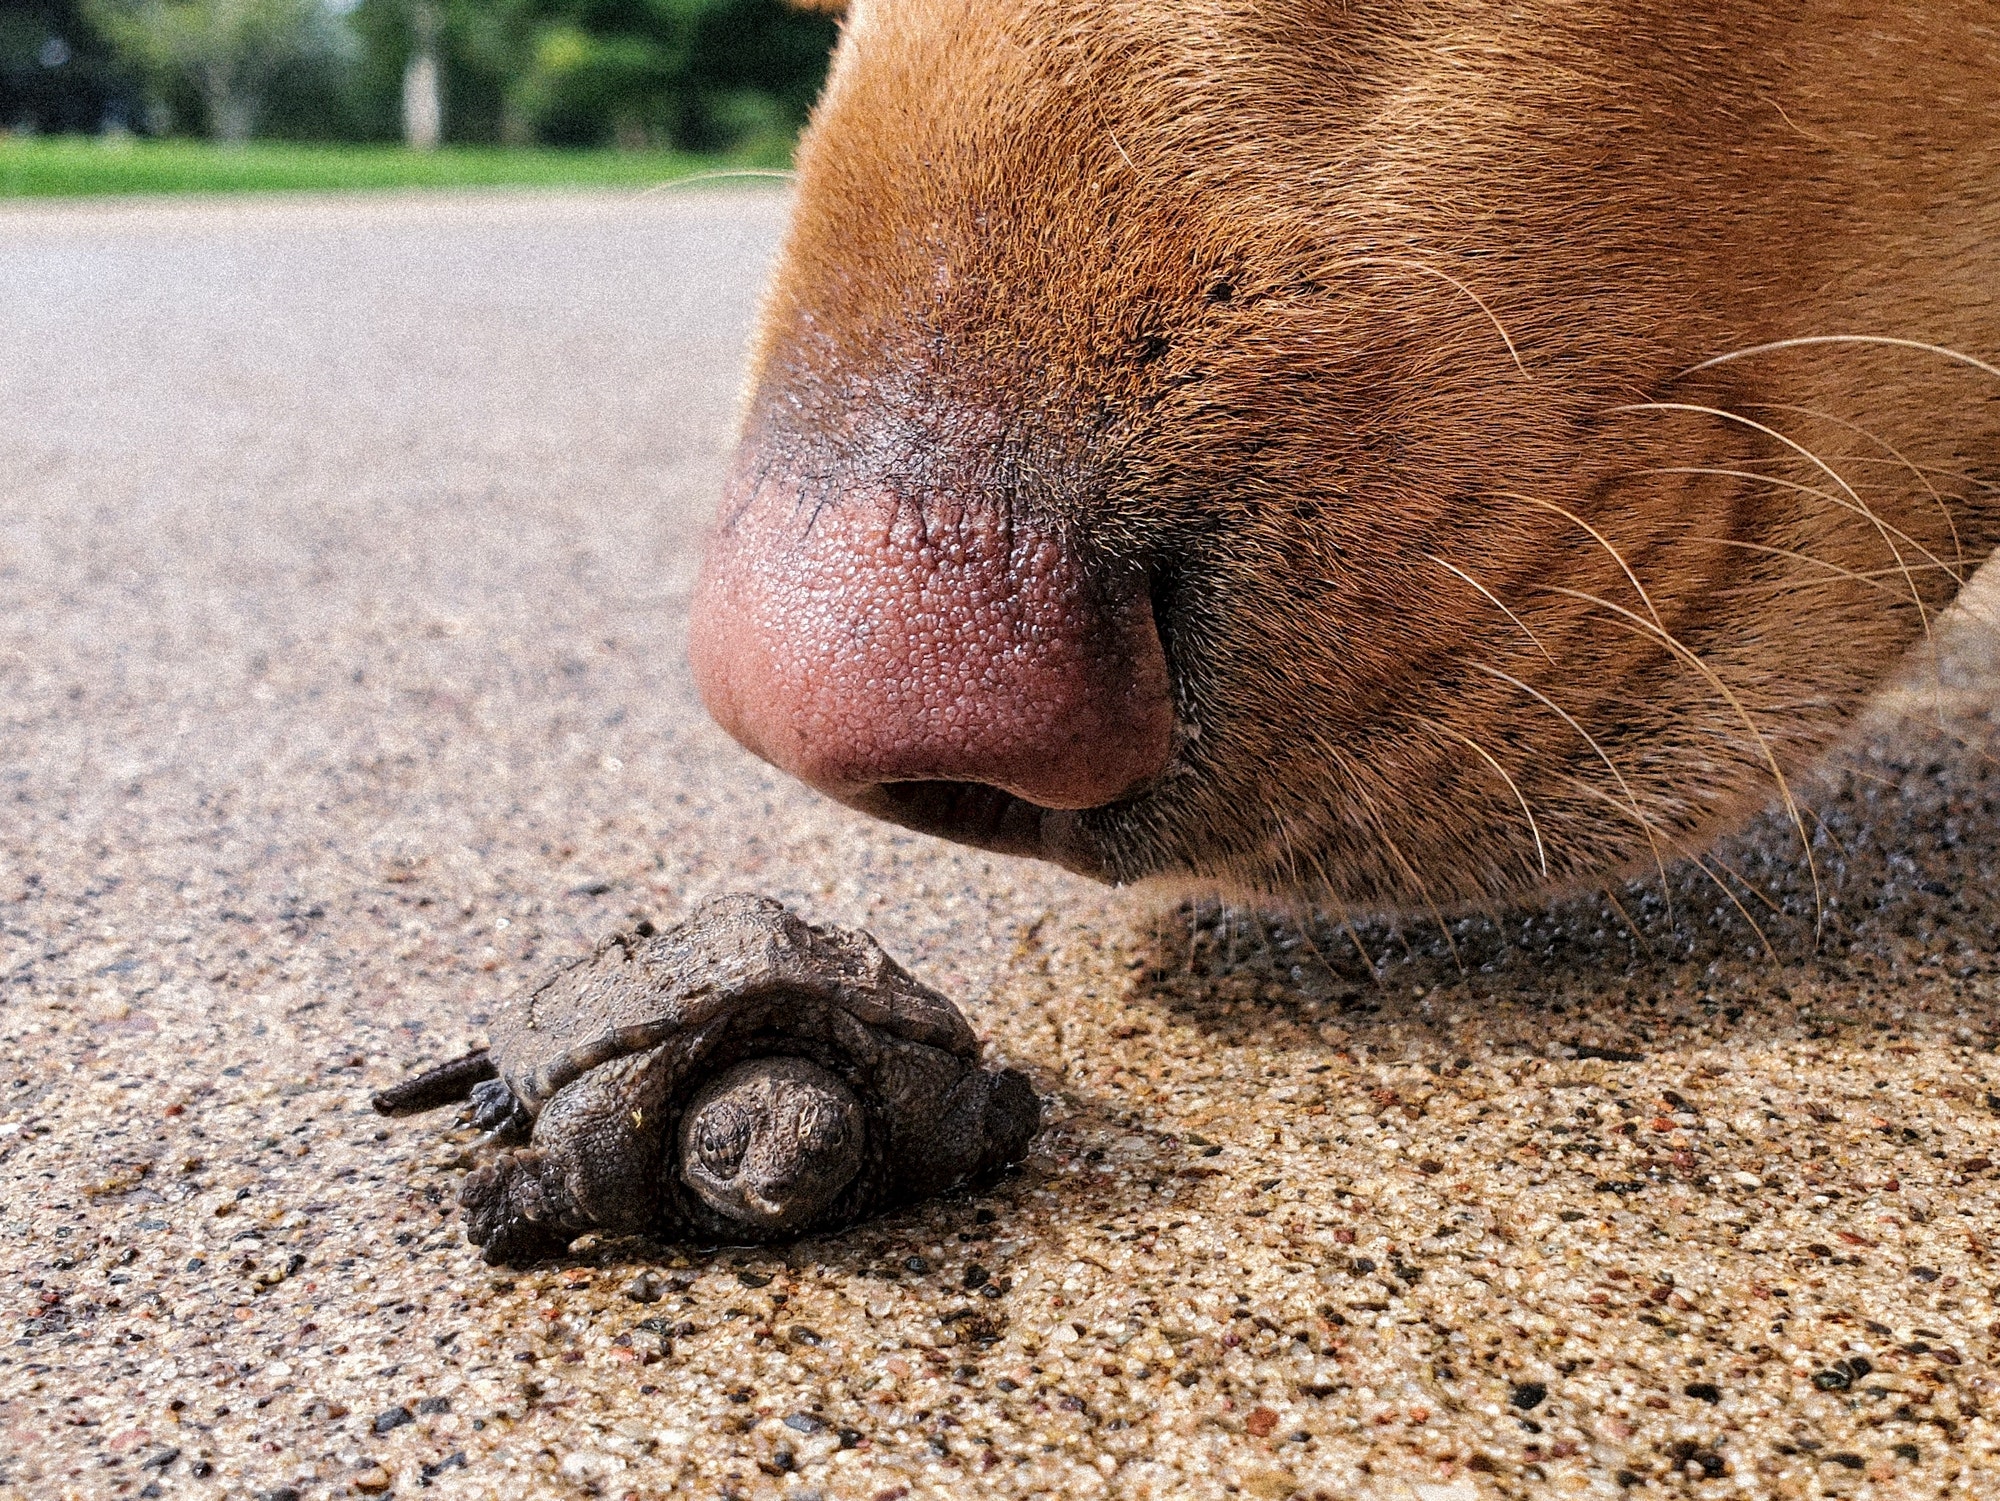 Closeup of a dog's nose sniffing on a baby snapping turtle on a cement driveway.